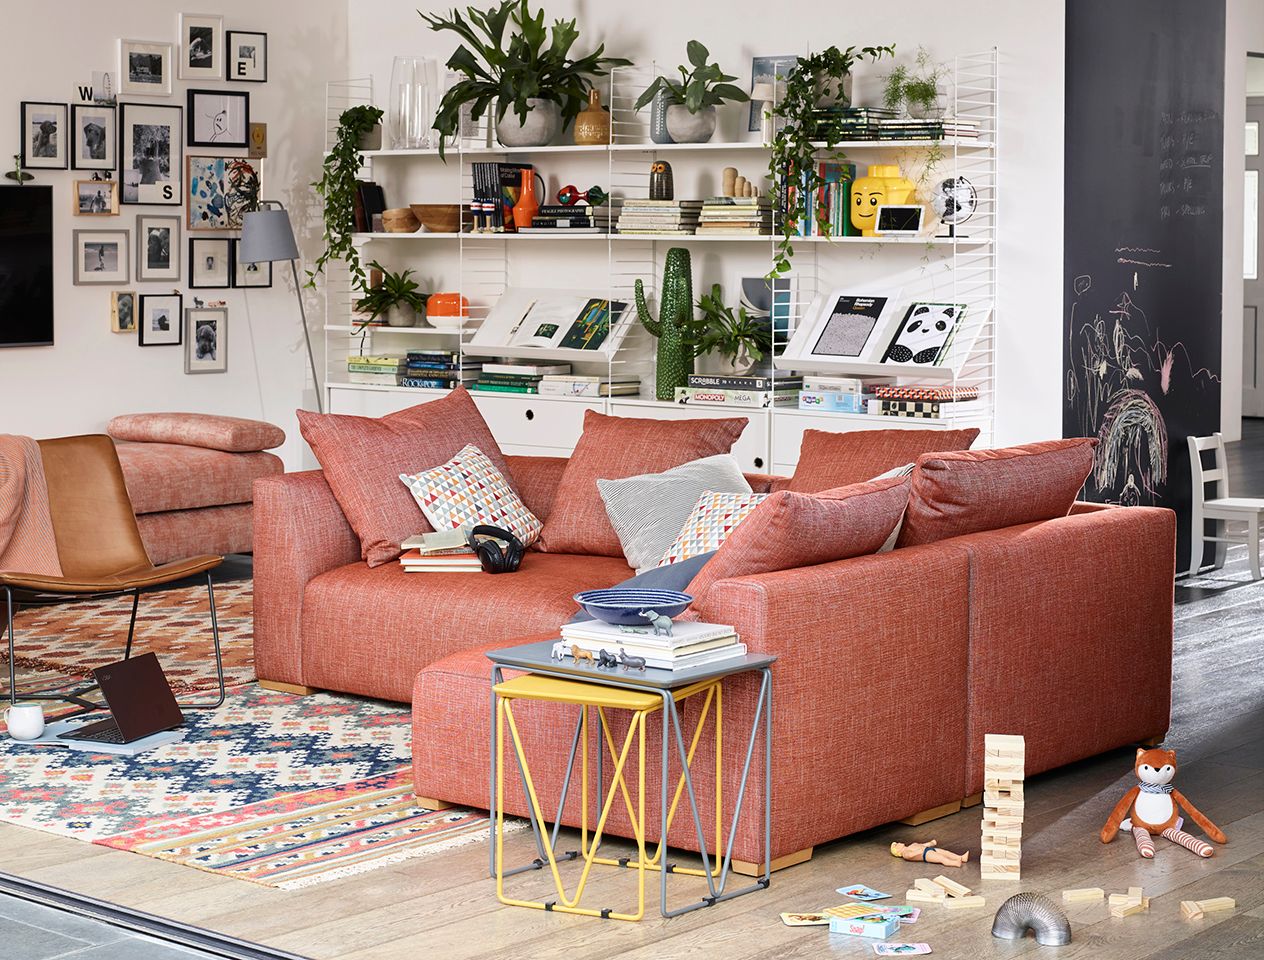 Ideas For A Living Room Storage John Lewis Partners